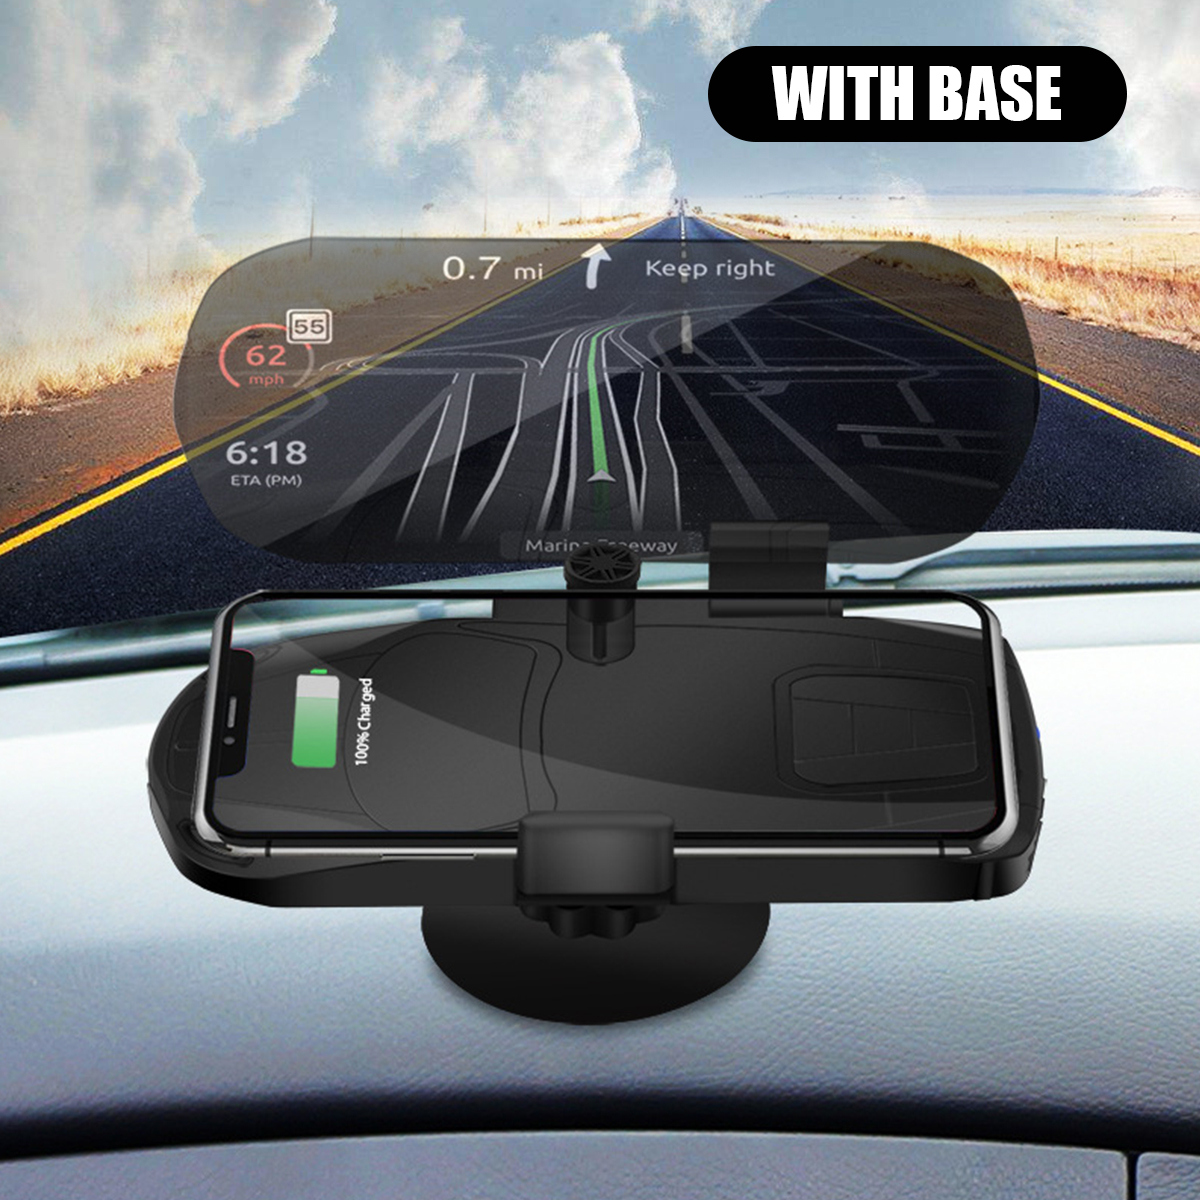 10W-Qi-Wireless-Charger-Car-Hub-Head-up-Navigation-Display-Phone-Holder-For-iPhone-Samsung-Huawei-Xi-1425312